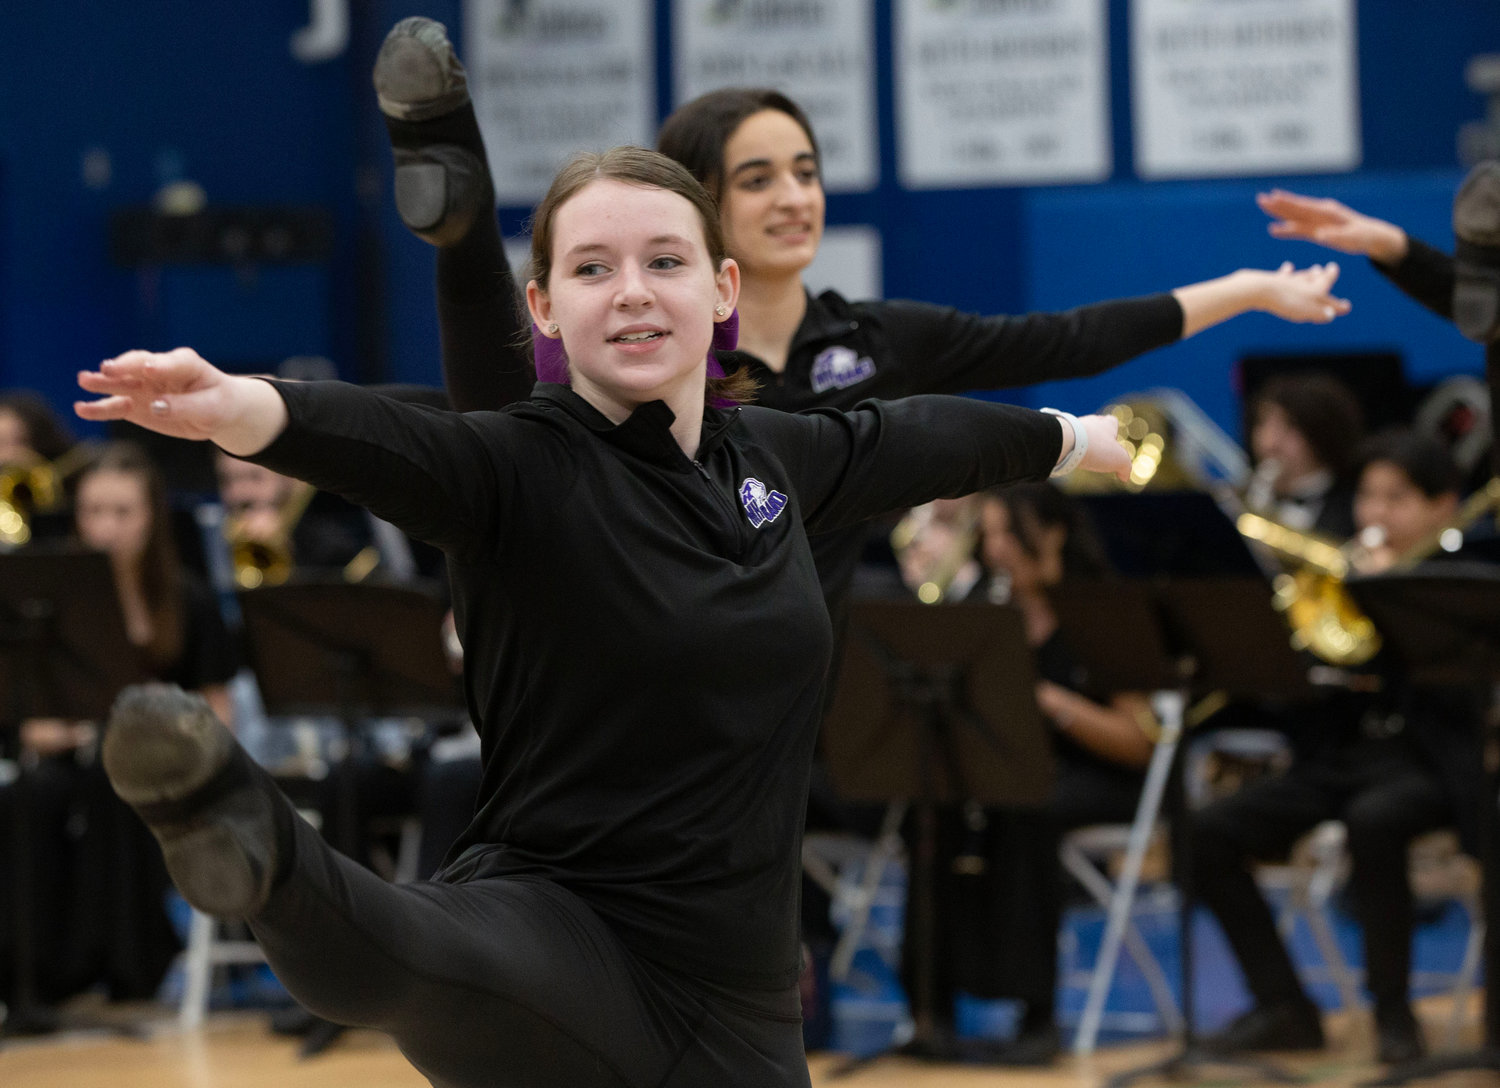 Delaney Clays and the dance team perform with the Mt. Hope Marching Band during I want to Hold Your Hand.